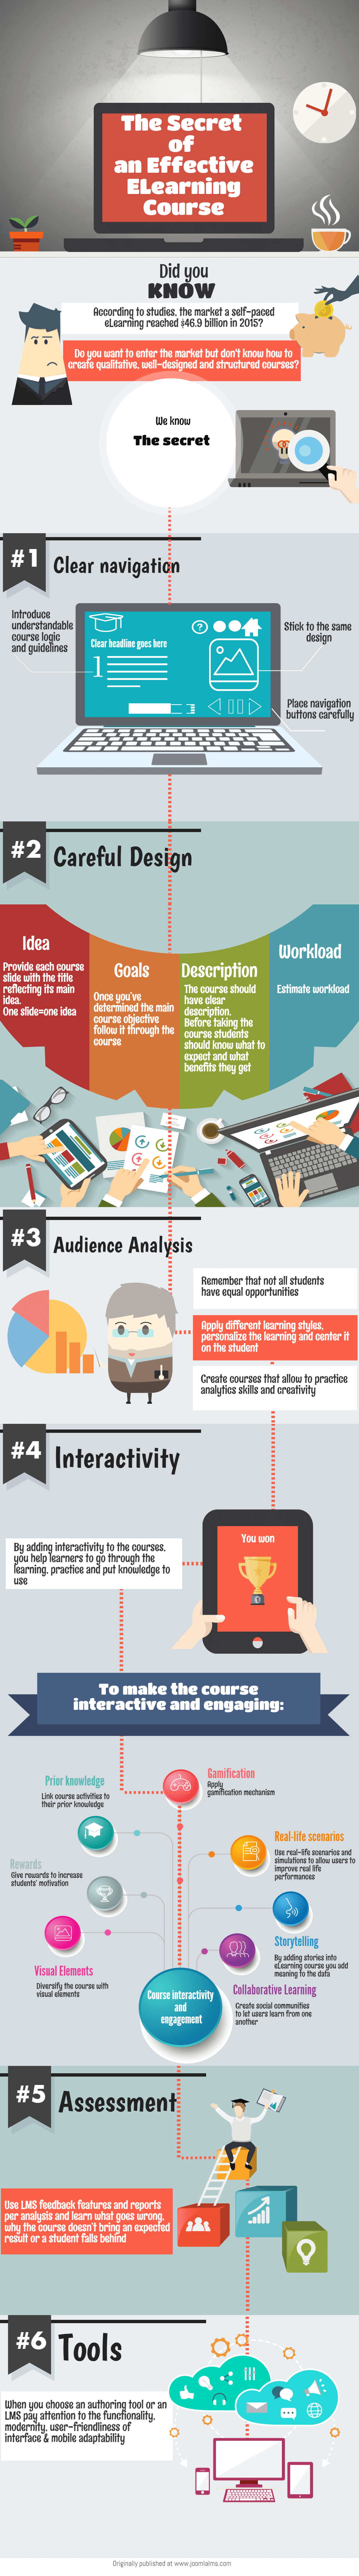 secret-of-effective-elearning-course-infographic